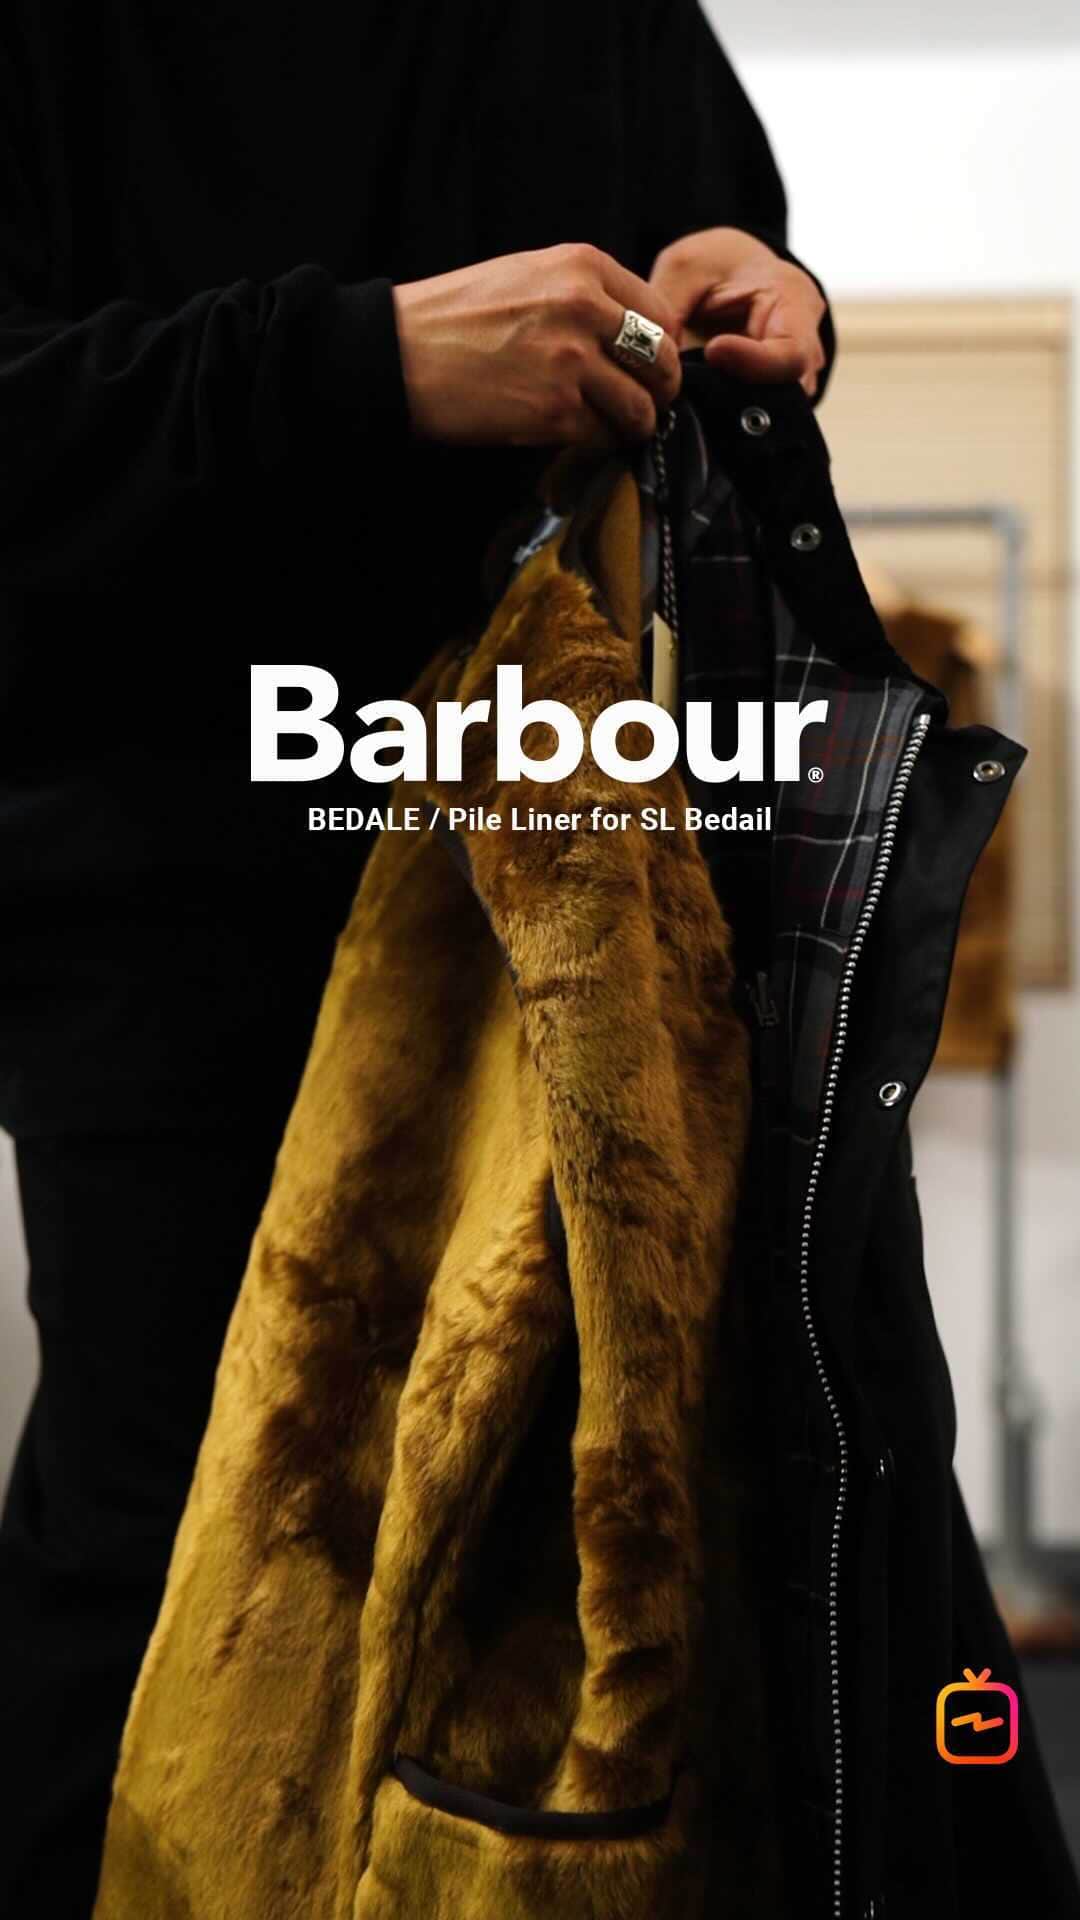 ARKnetsのインスタグラム：「・﻿ ARKnets IGTV 〜vol.37 ・﻿ ﻿ Barbour(バブアー)のBEDALEとPile Liner for SL Bedailを使ったコーディネイトをご紹介します。  １世紀余りに渡って英国紳士に愛されてきた「バーブアー」は、英国王室御用達を拝命し、堂々たる英国伝統ブランドとして今もなおその比類なき品質を保ち続けている。  《 紹介アイテム 》  OUTER : Barbour ITEM：BEDALE SL https://bit.ly/2Jqp5oo  OUTER : Barbour ITEM：BEDALE https://bit.ly/3l9mwUM  LINER : Barbour ITEM：Pile Liner for SL Bedail https://bit.ly/2KNjn0p  PARKER : WP ITEM：ROCK STEADY3 PULL PARKA https://bit.ly/3mgvhxG  BLOUSON :GOLD ITEM：MILLING C/W TWILL PADDED TRACK JACKET https://bit.ly/3mgveSw  PANTS : GOLD ITEM：MILLING C/W TWILL WIDE EASY PANTS https://bit.ly/3fnaupt  PANTS : GOLD ITEM：14oz. DENIM 5POCKET WIDE PANTS HARD WASHED https://bit.ly/3mbgV1s  INNER : GOLD ITEM：16/- COTTON PEACH BRUSHED OFF-TURTLE NECK L/S T-SHIRT https://bit.ly/3fG7wg2  SHOES :marka ITEM：DOUBLE SOLE TRAILRUNNER "OX" - nubuck - https://bit.ly/33m6D7u  << ARKnets Official Instagram >>﻿ @arknets_official﻿ ﻿ << ARKnets Official HP >>﻿ https://www.arknets.co.jp﻿/ ﻿ << Heavy Smoker’s Blog >>﻿ https://ameblo.jp/arknets/﻿  #Barbour #バブアー #BEDALE #ビデイル #コーディネイト #ARKnets #栃木 #宇都宮 #セレクトショップ #ファッション #styling #スタイリング #スタイル #fashion #20aw #2020aw」